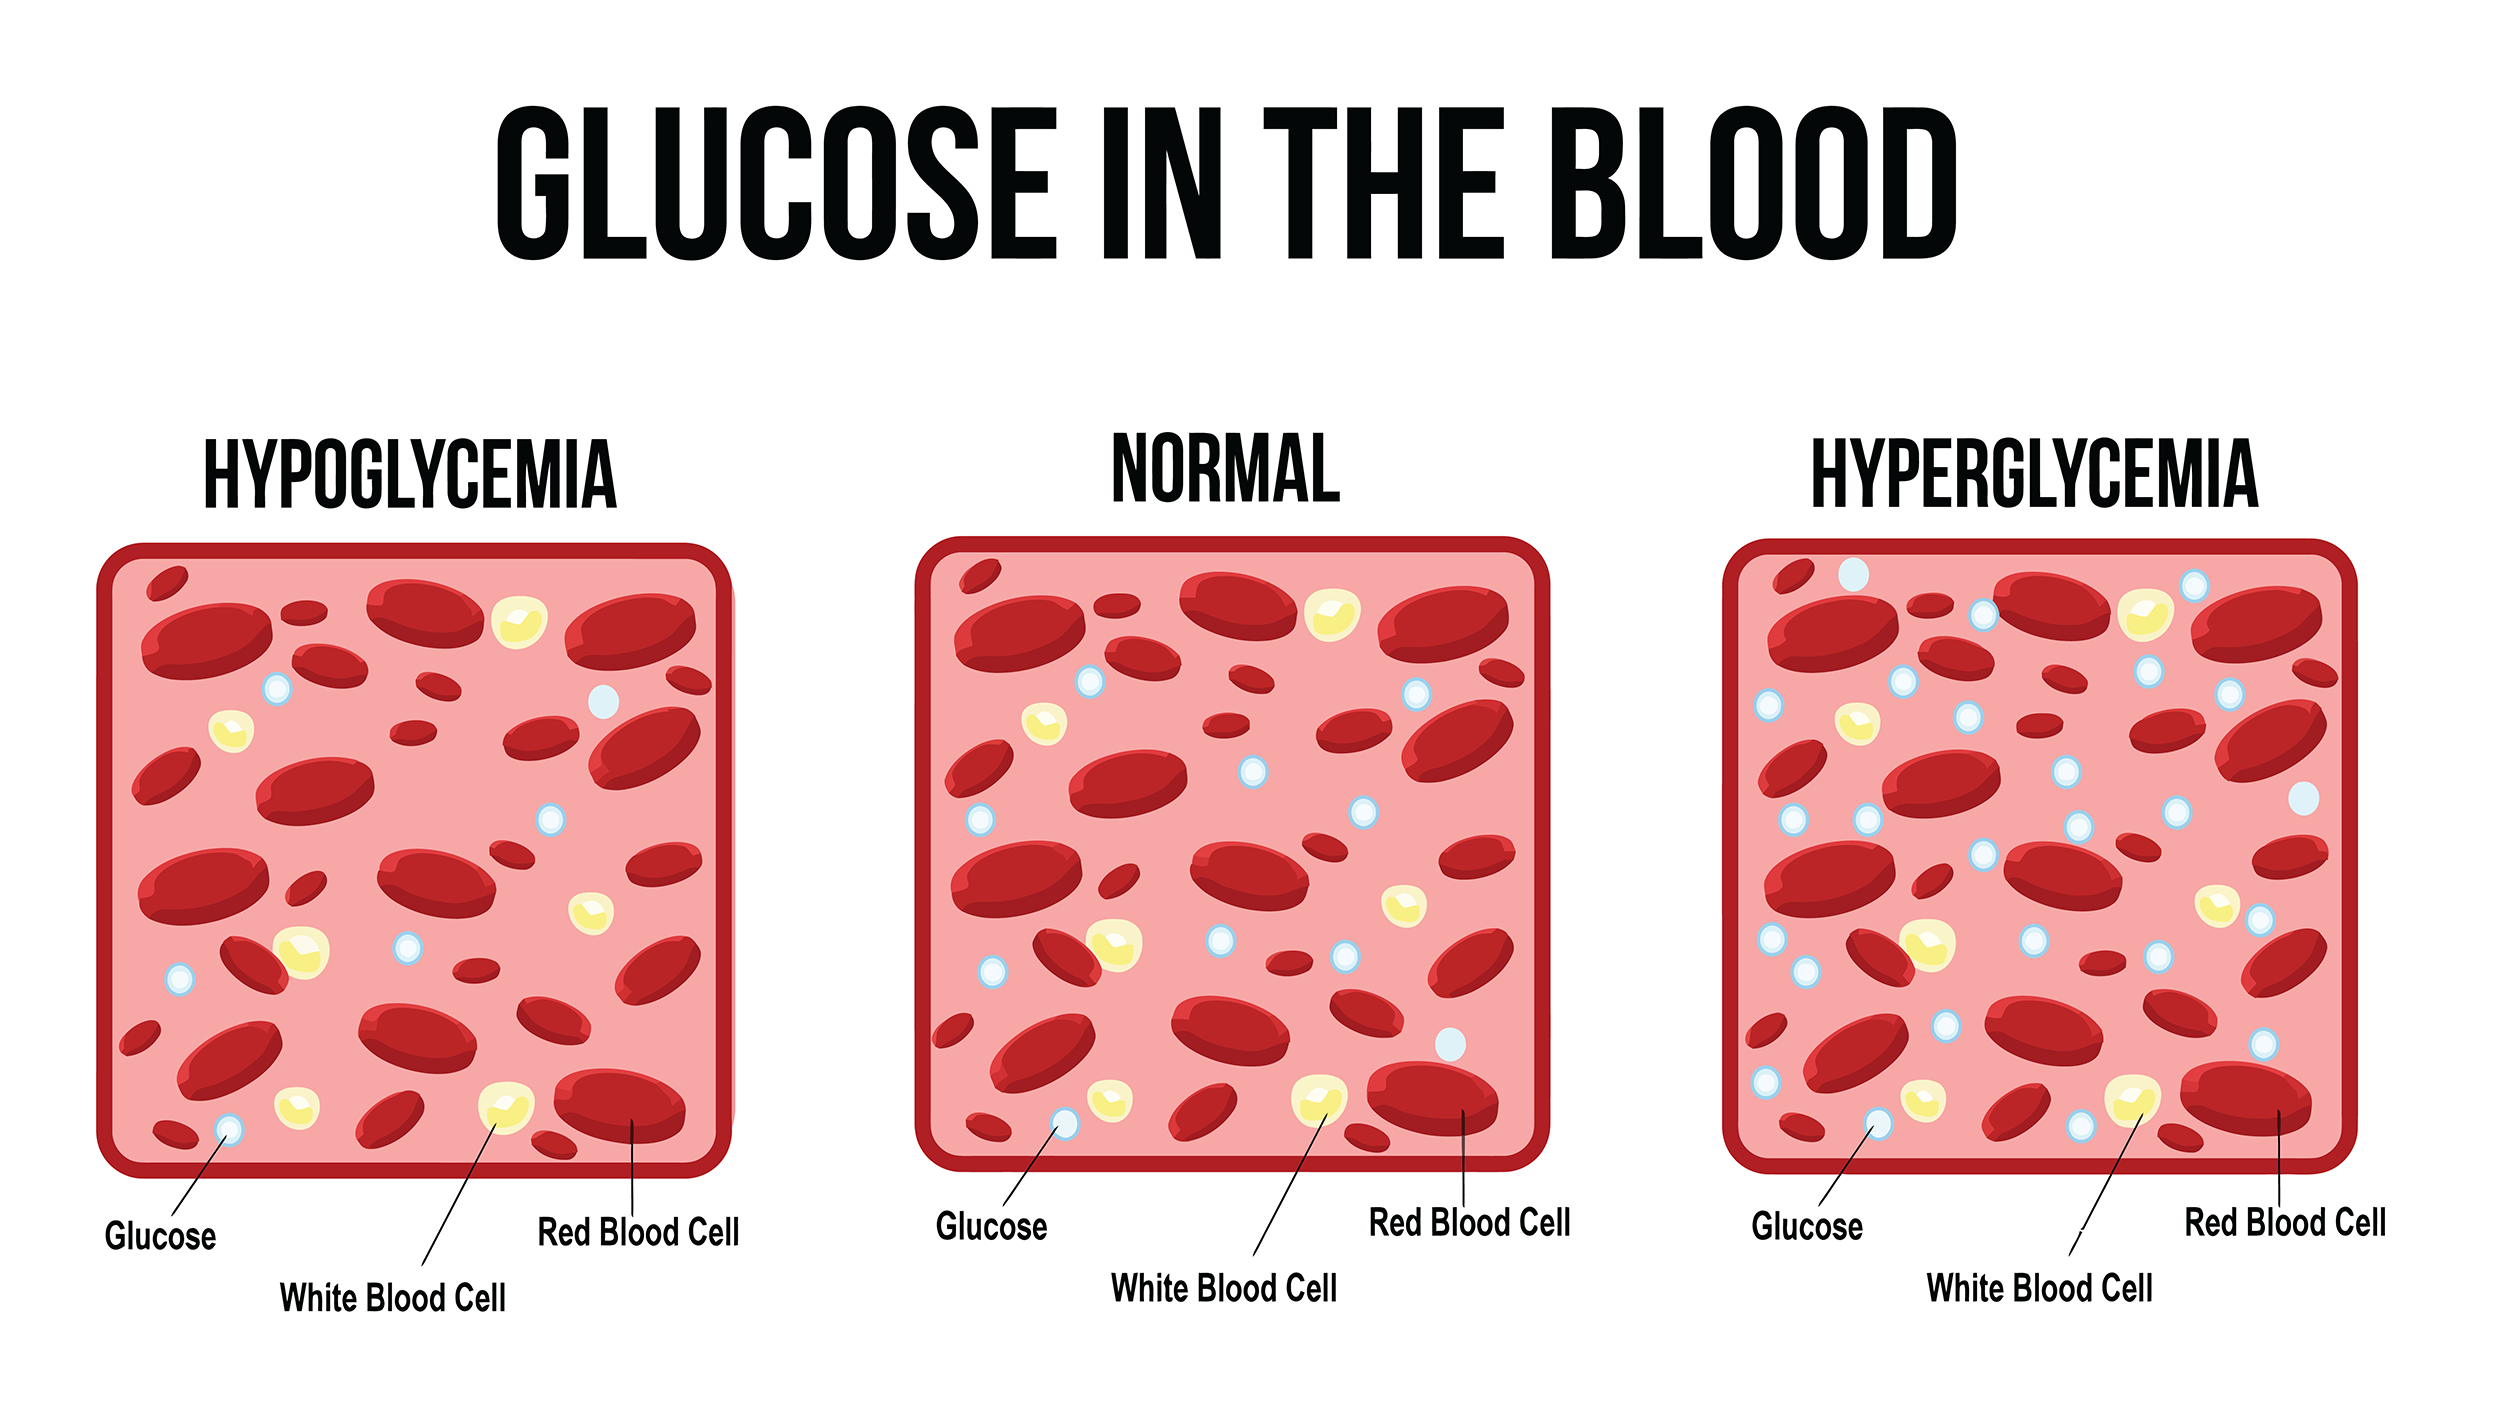  Glucose in the blood (hyperglycemia vs hypoglycemia) 